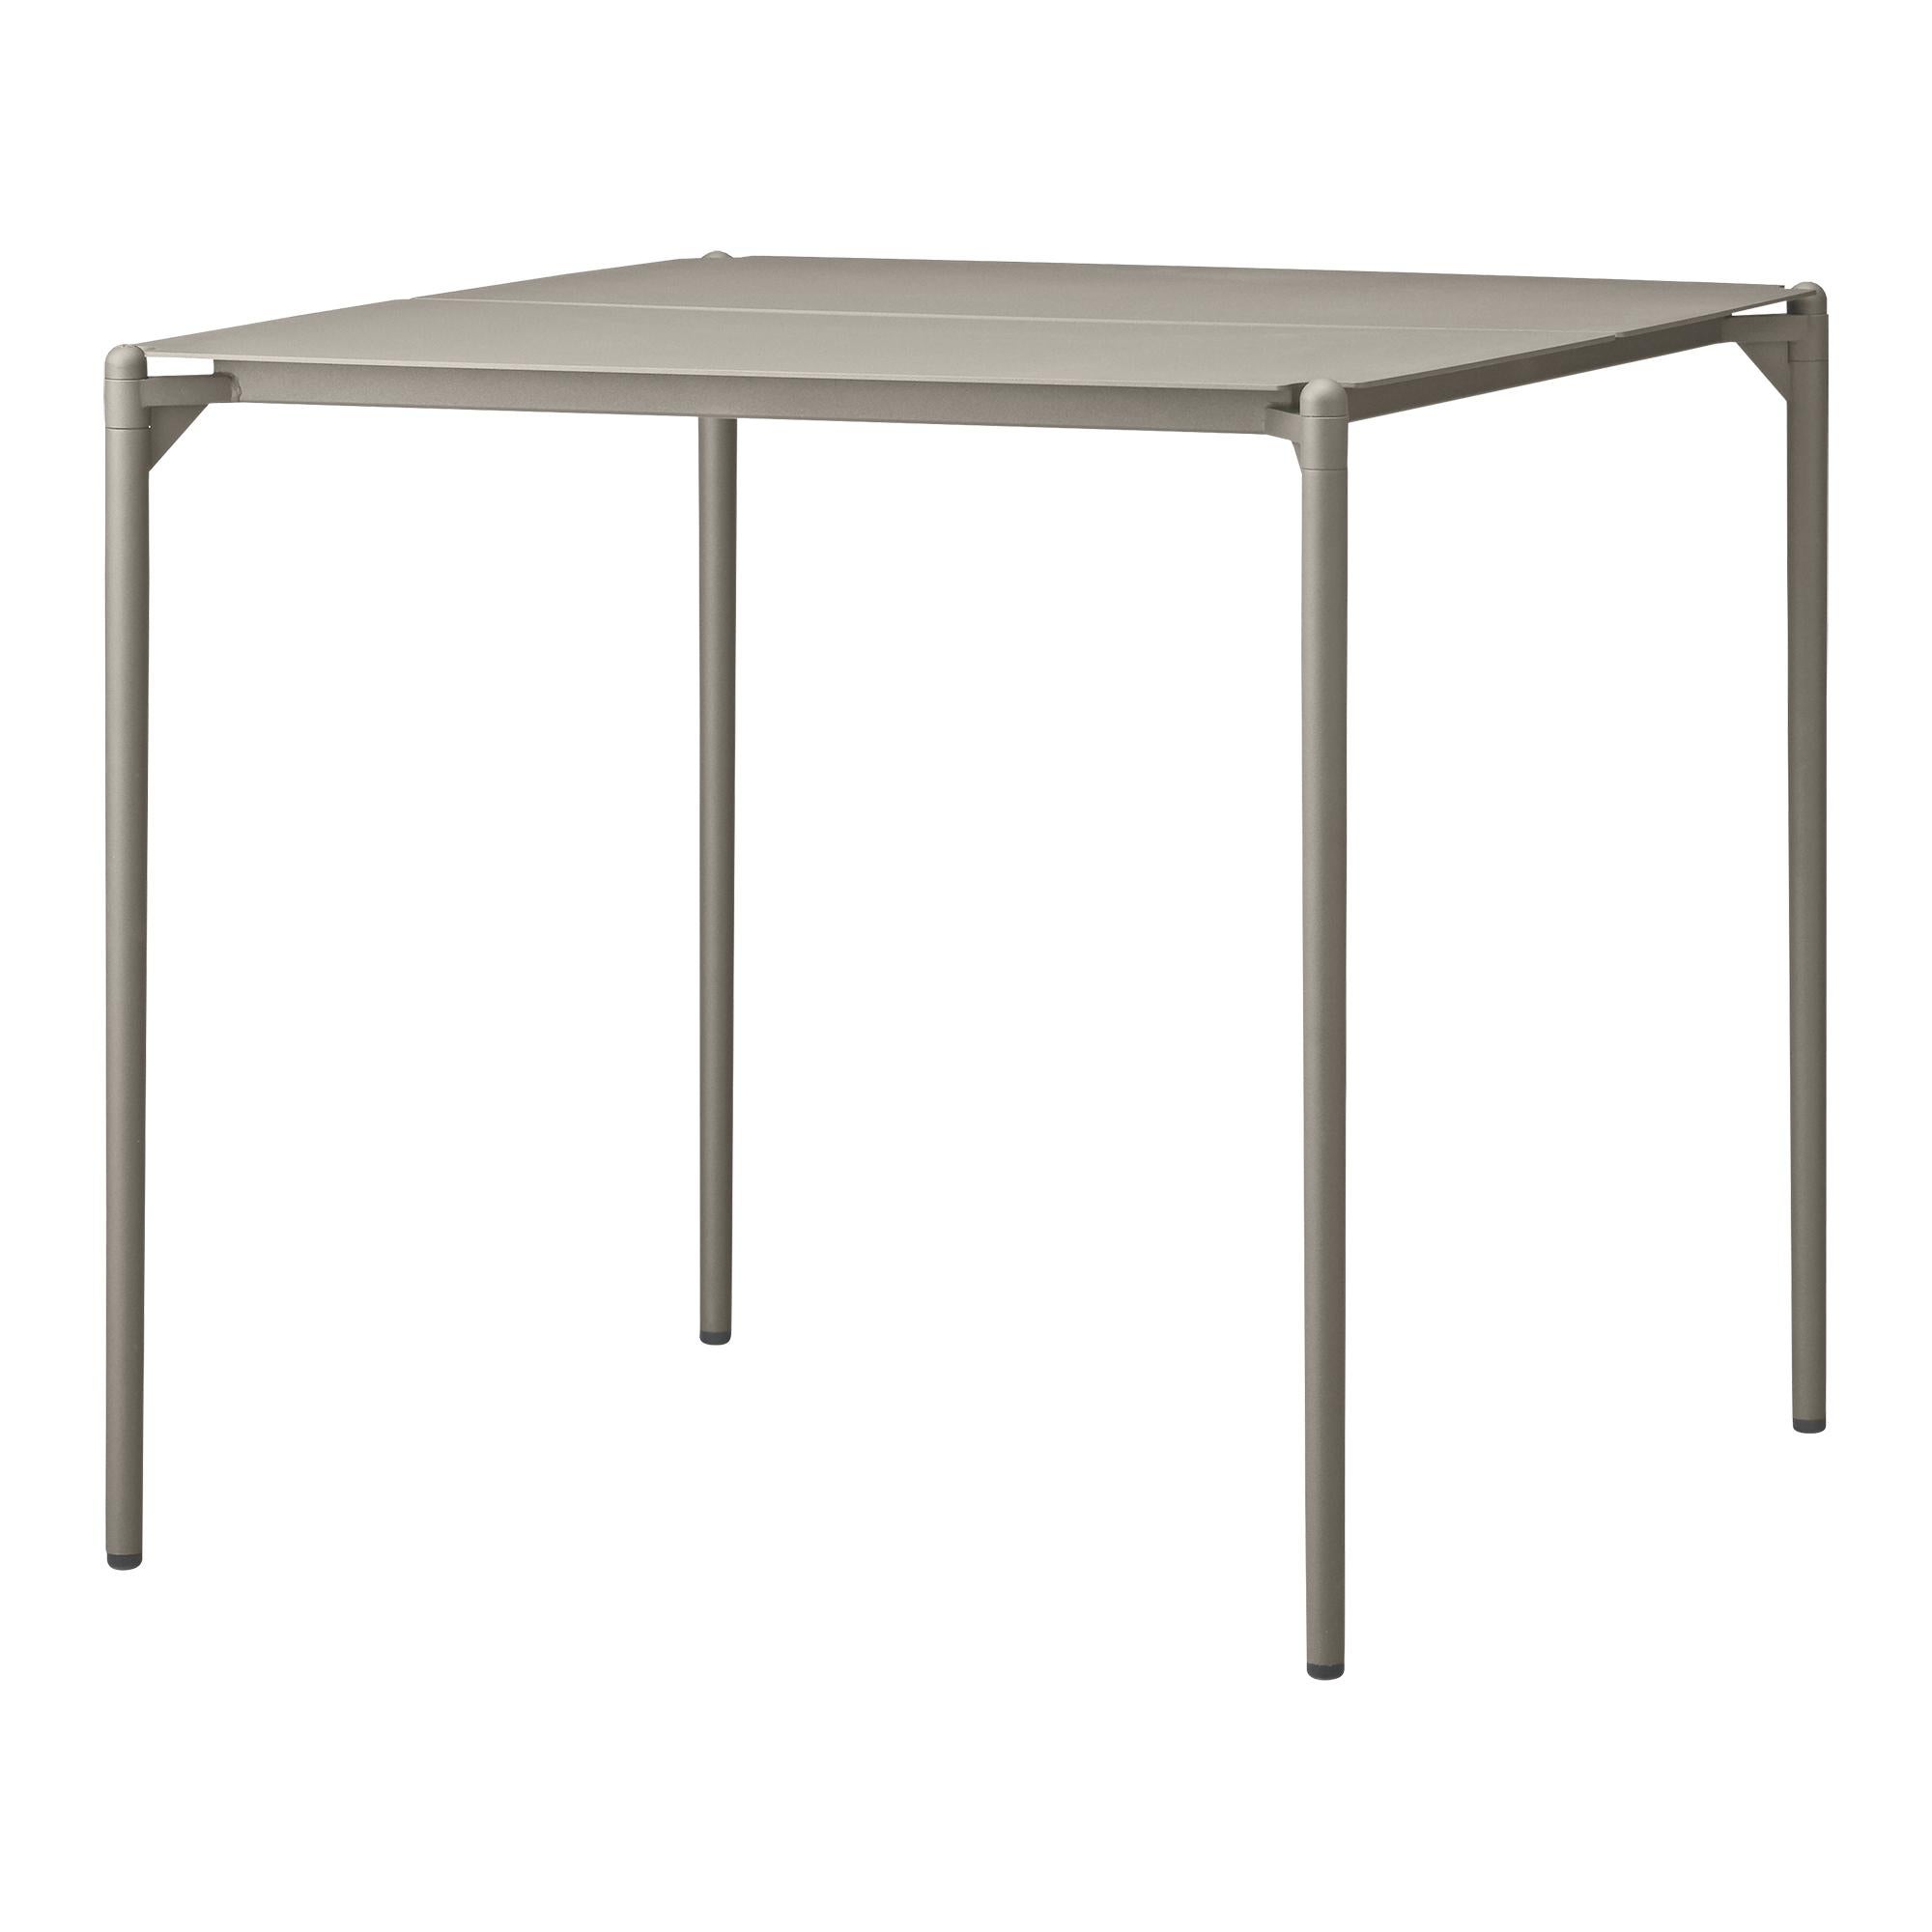 Small taupe minimalist table
Dimensions: D 80 x W 80 x H 72 cm 
Materials: Steel w. Matte powder coating & aluminum w. Matte powder coating
Available in colors: Taupe, bordeaux, forest, ginger bread, black and, black and gold.


Bring elegance